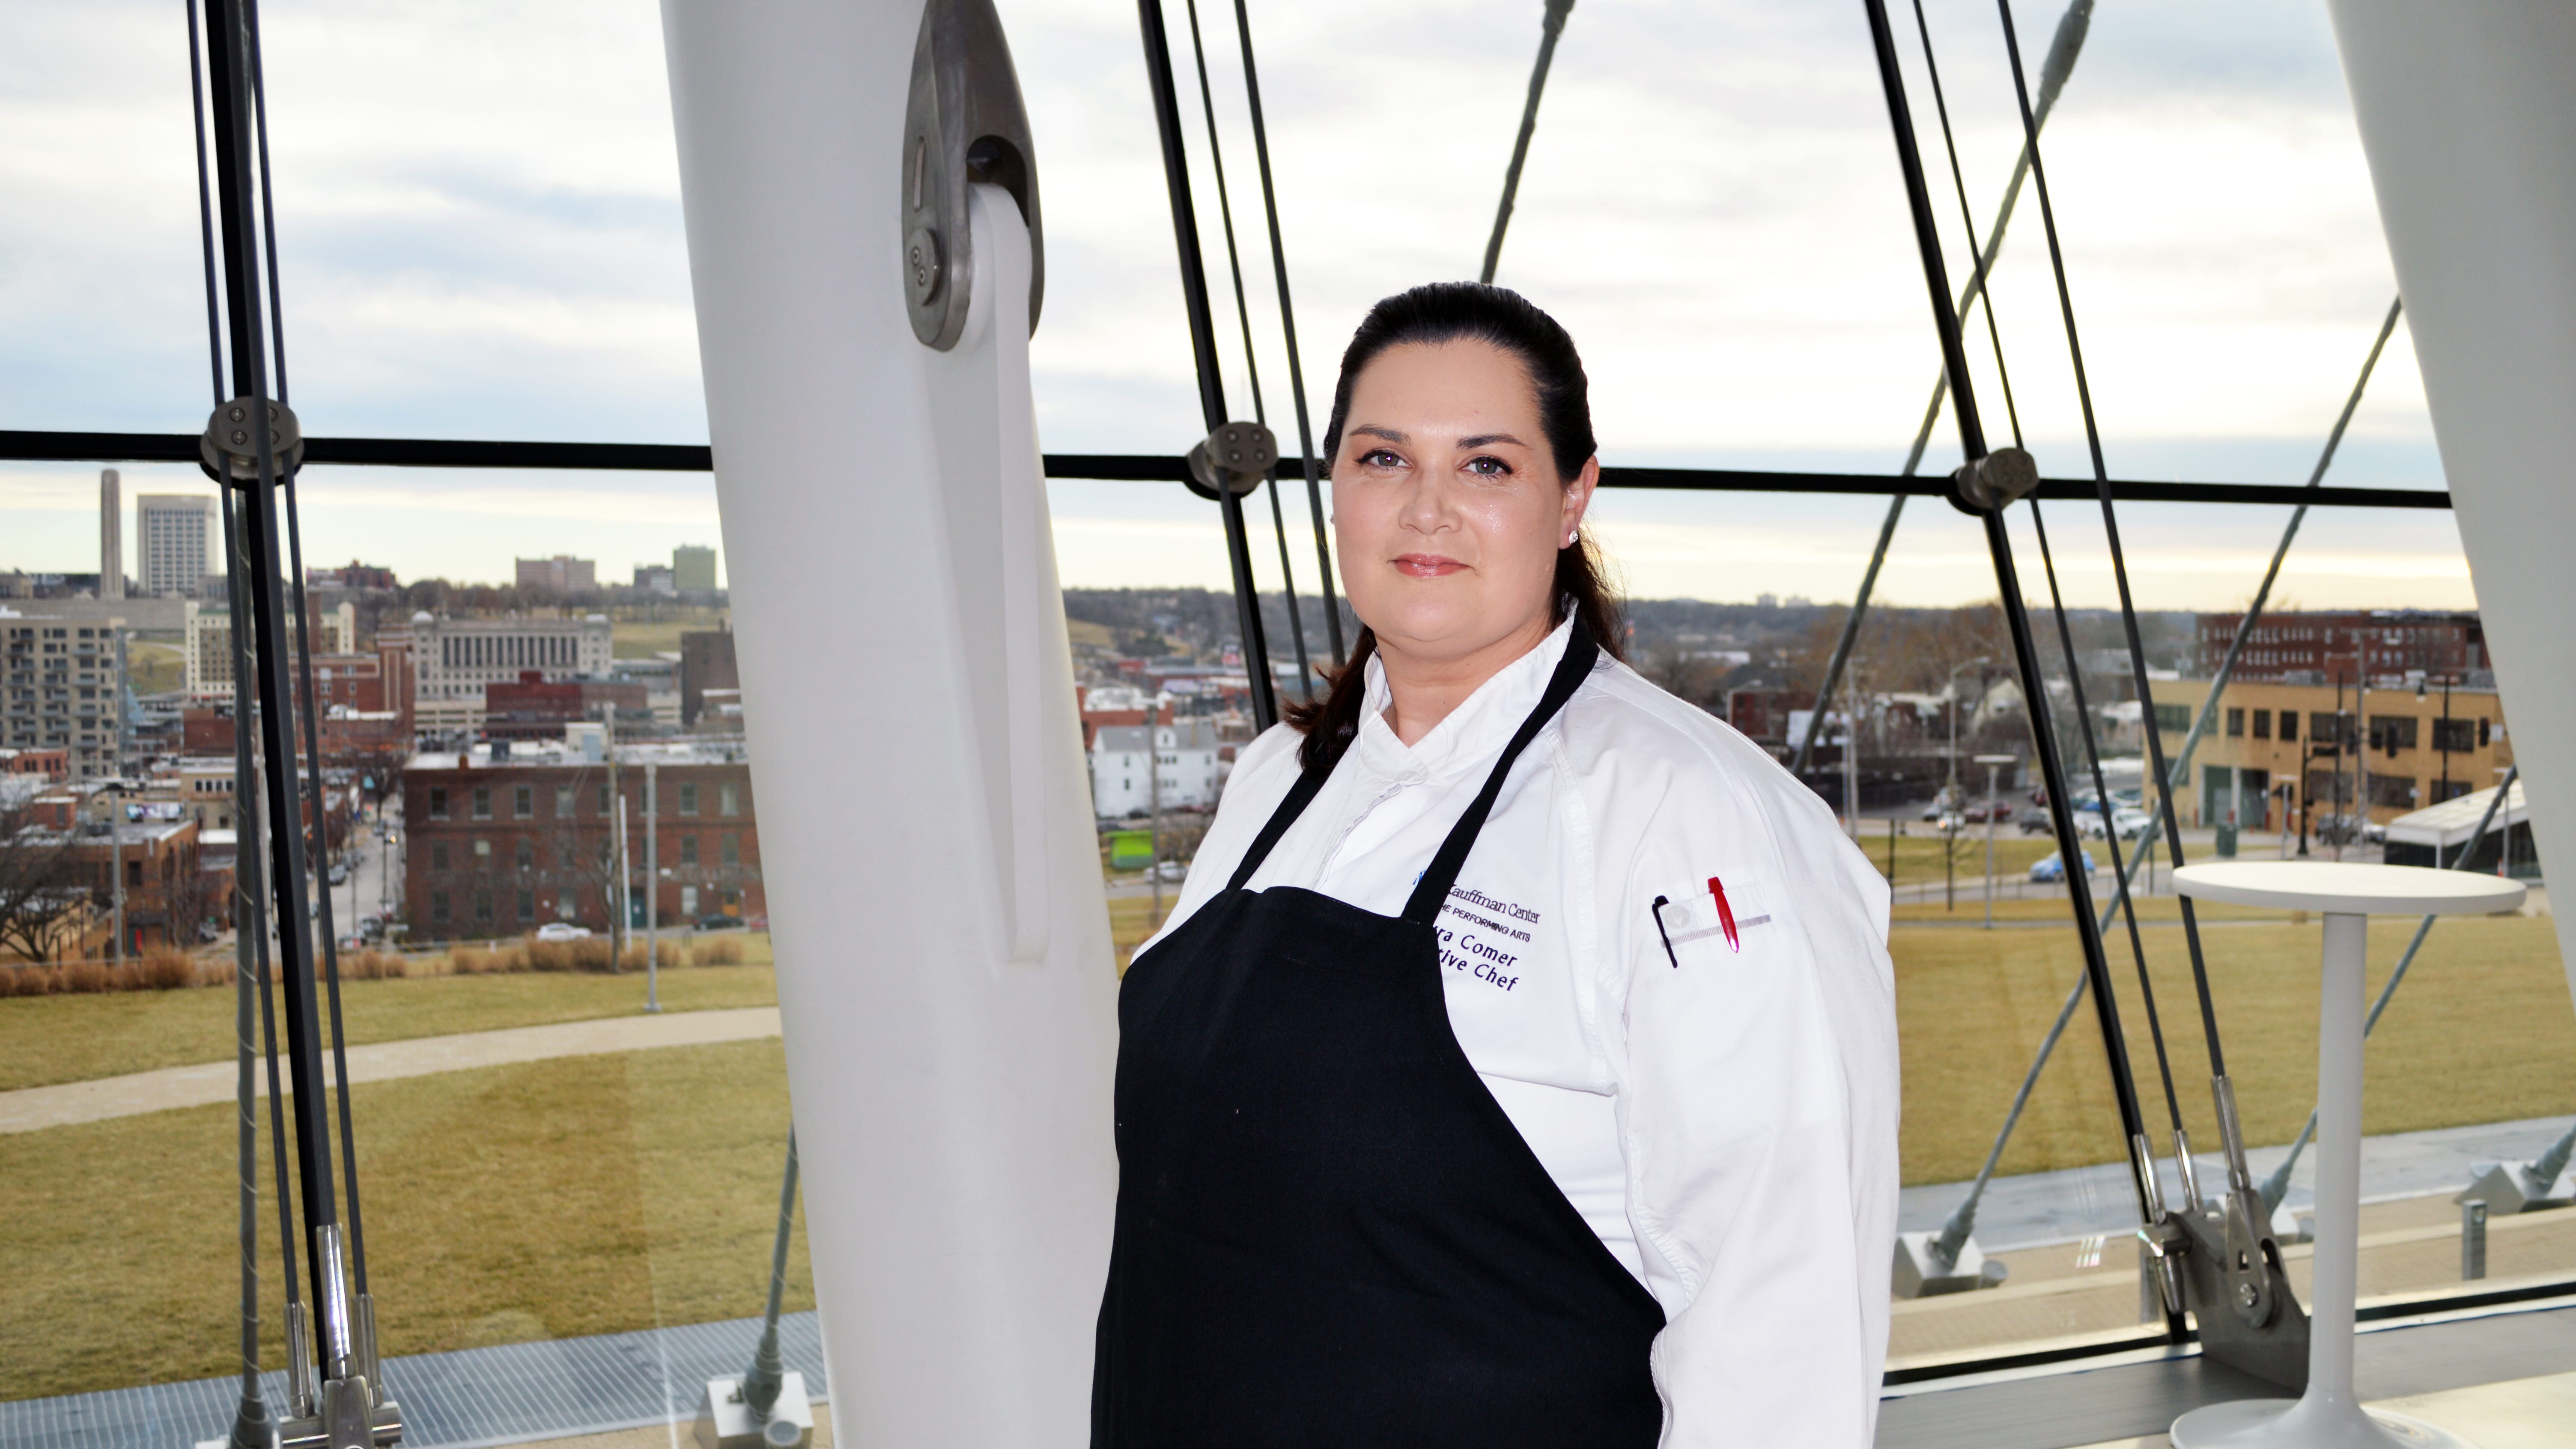 Executive Chef Laura Comer oversees The Dining Experience inside the Kauffman Center for the Performing Arts.